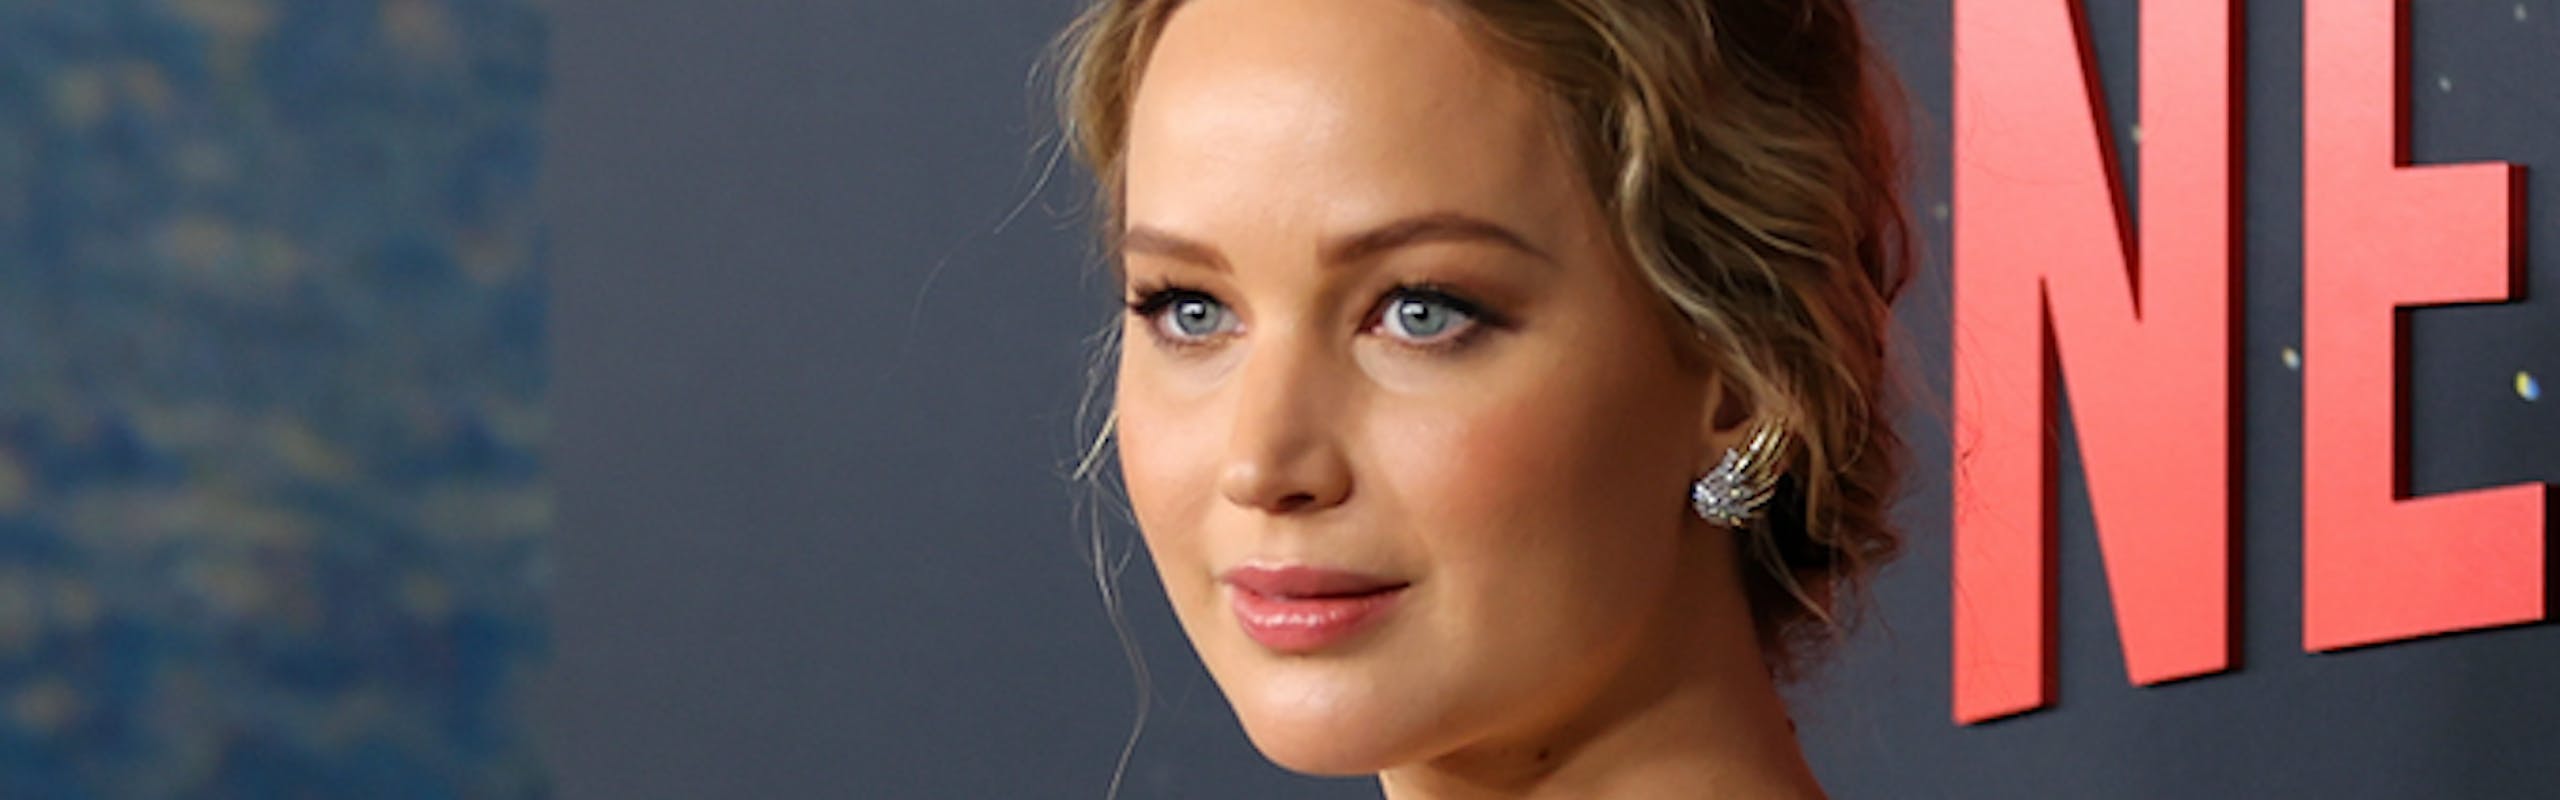 Pregnant Jennifer Lawrence poses for a photograph in a gold gown.